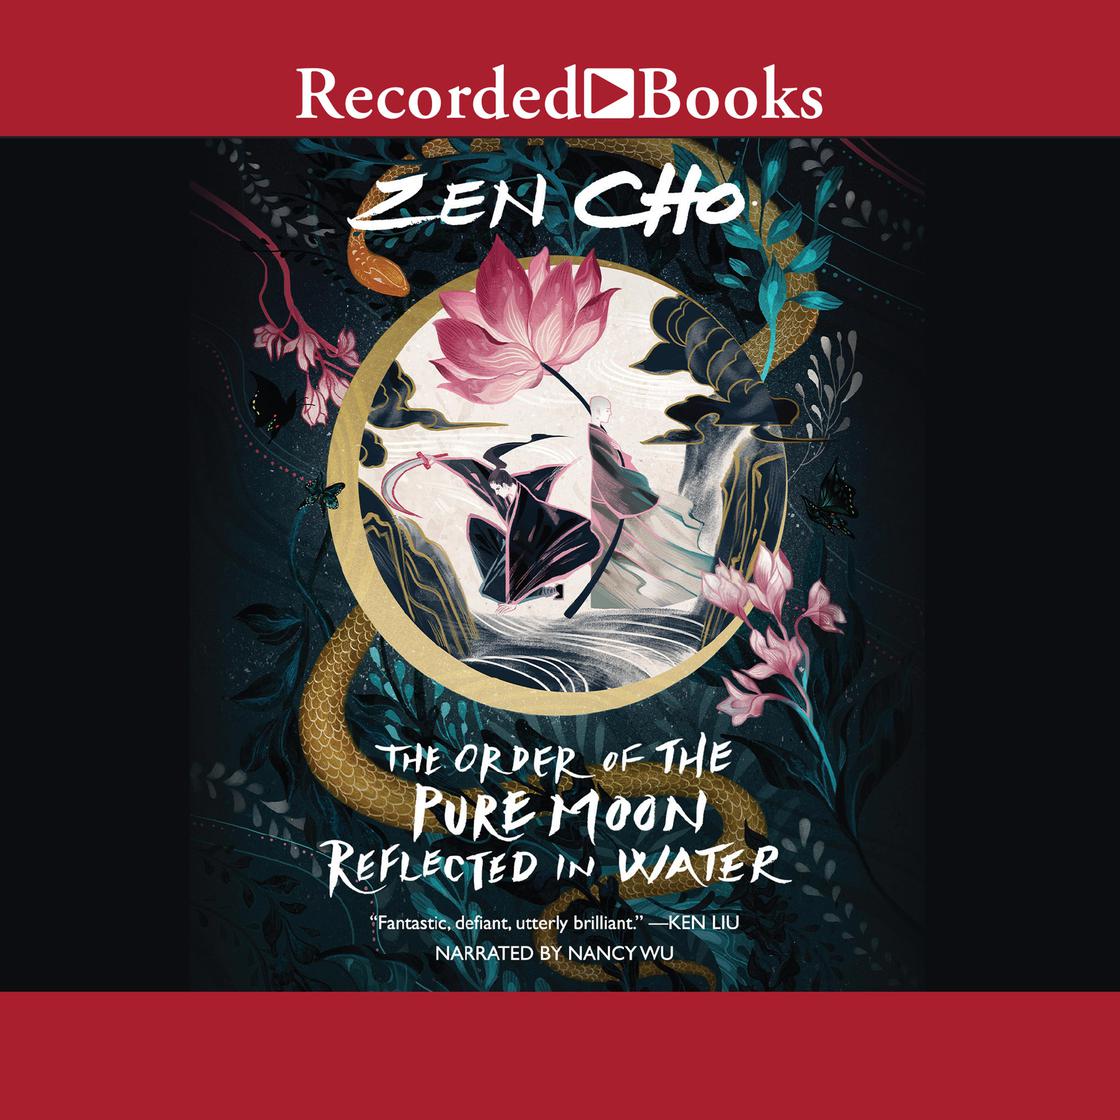 Zen Cho: The Order of the Pure Moon Reflected in Water (AudiobookFormat, 2020, Recorded Books, Inc.)